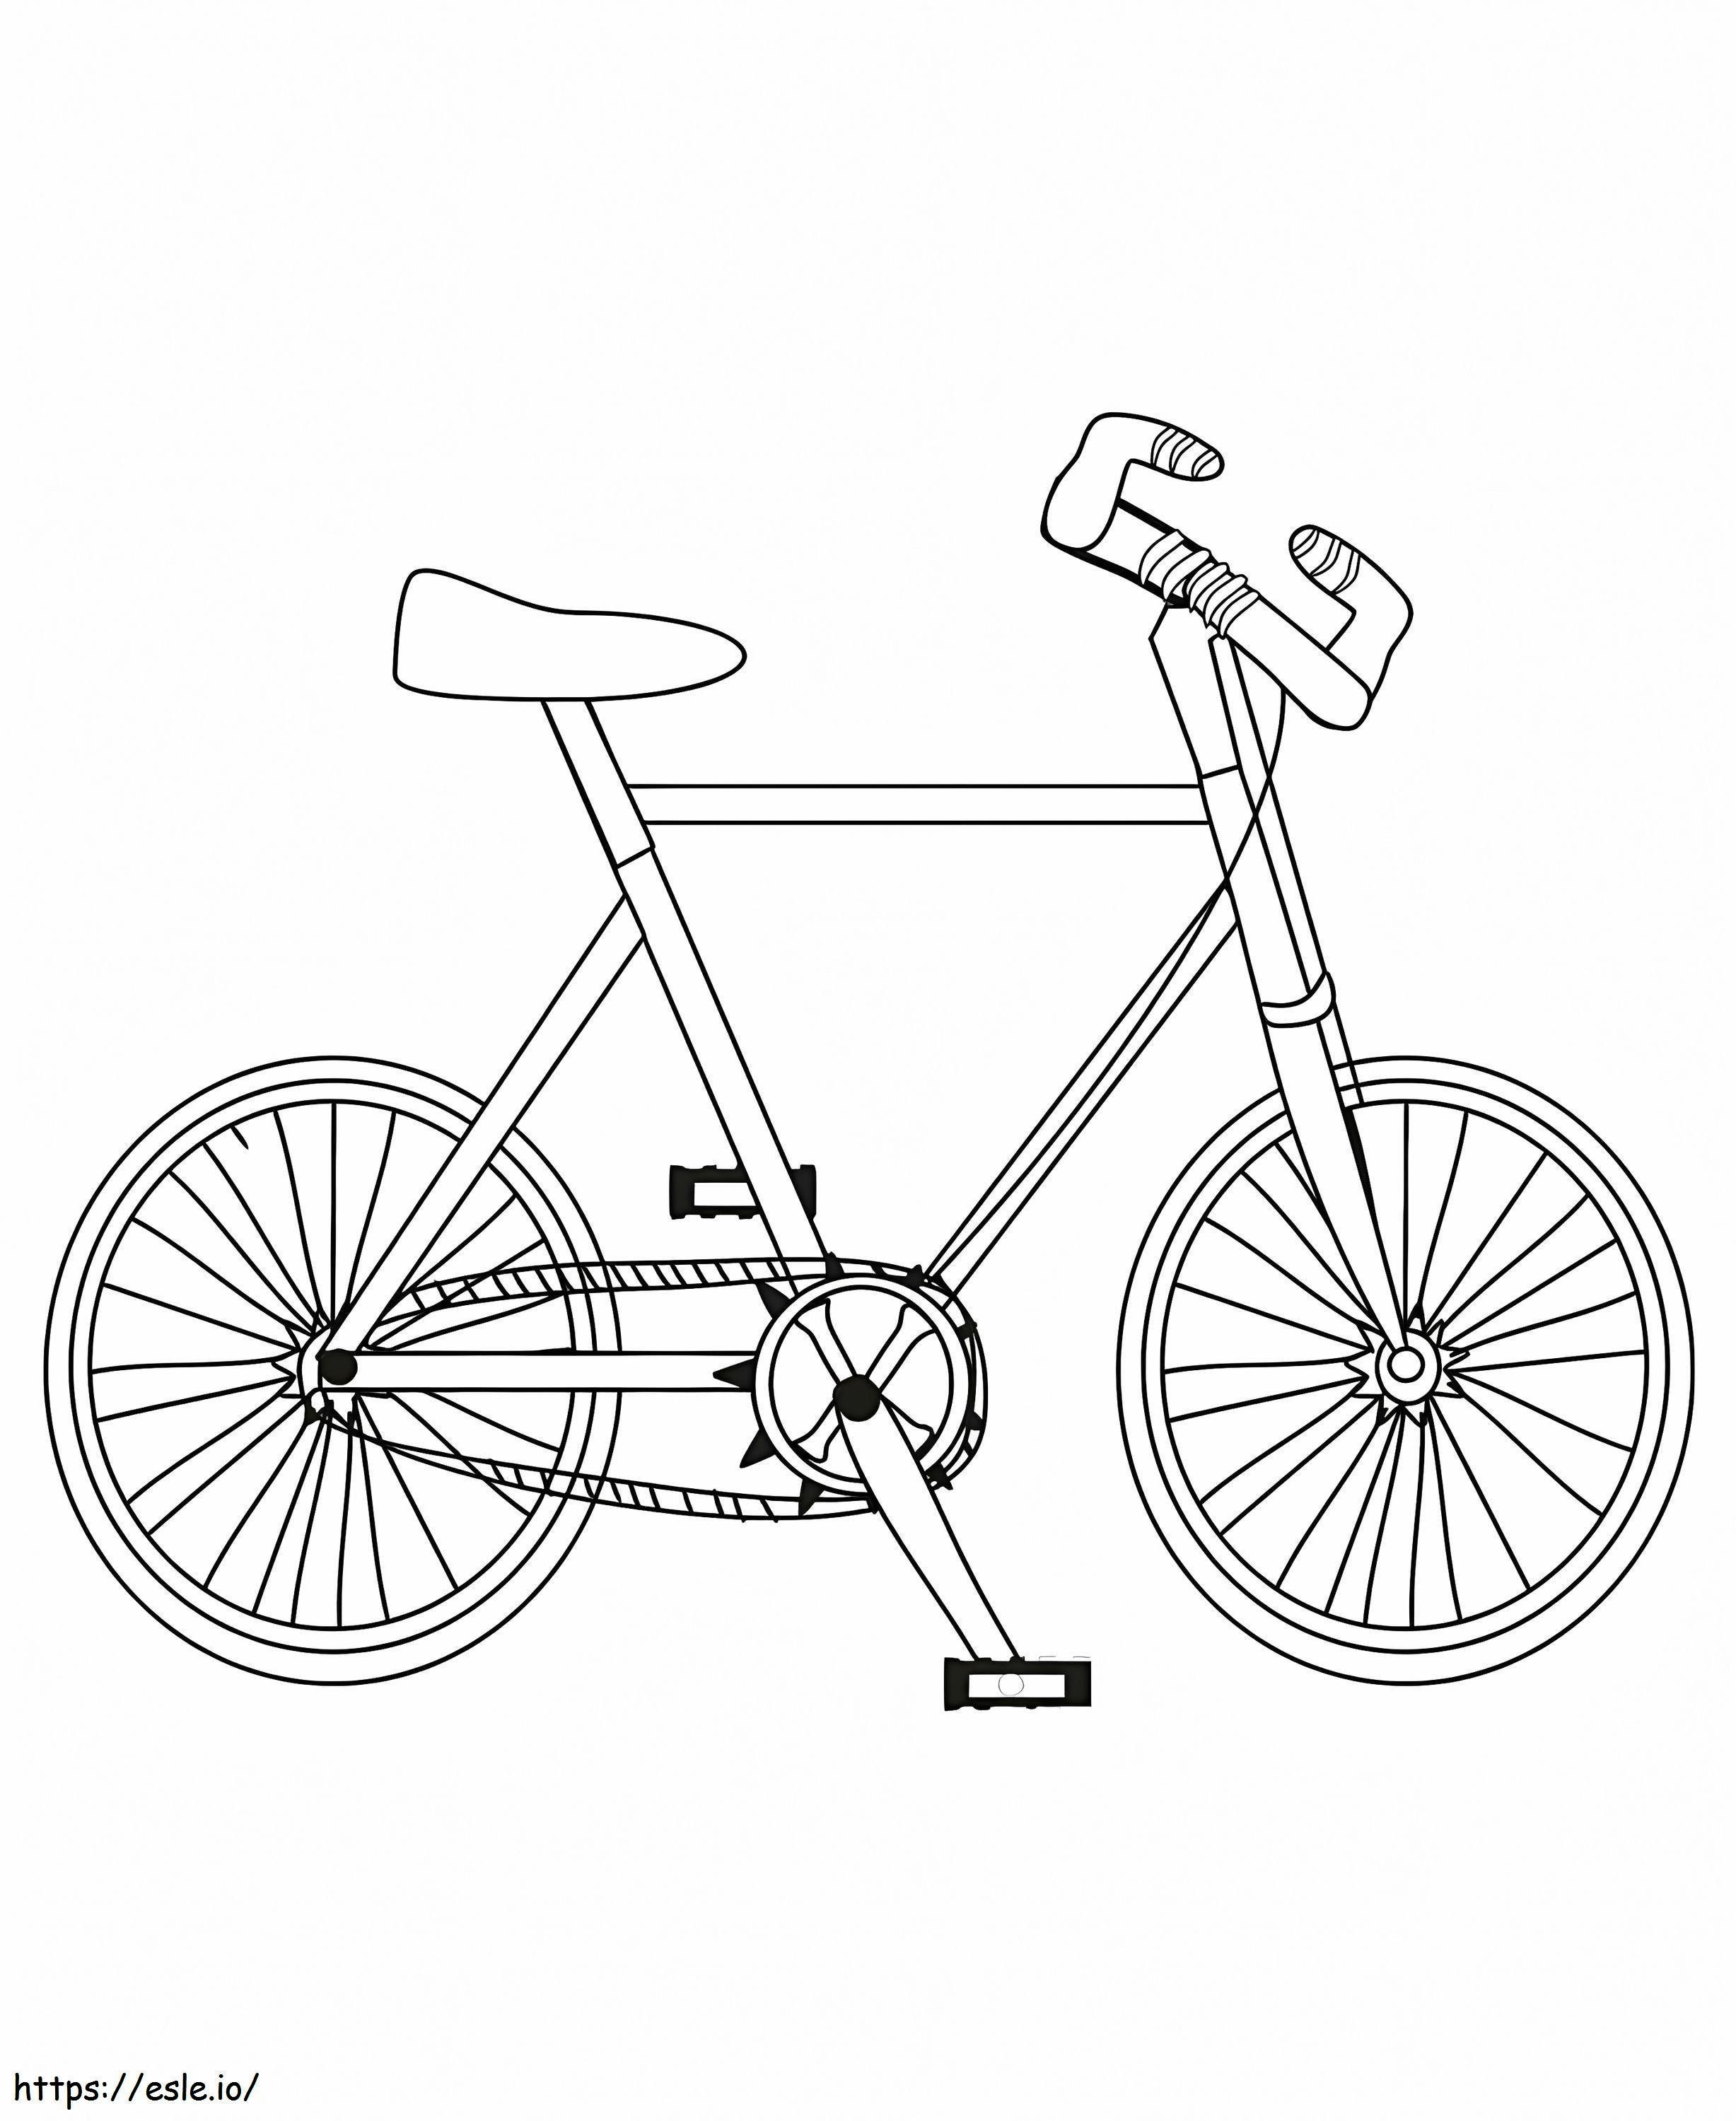 Free Printable Bicycle coloring page